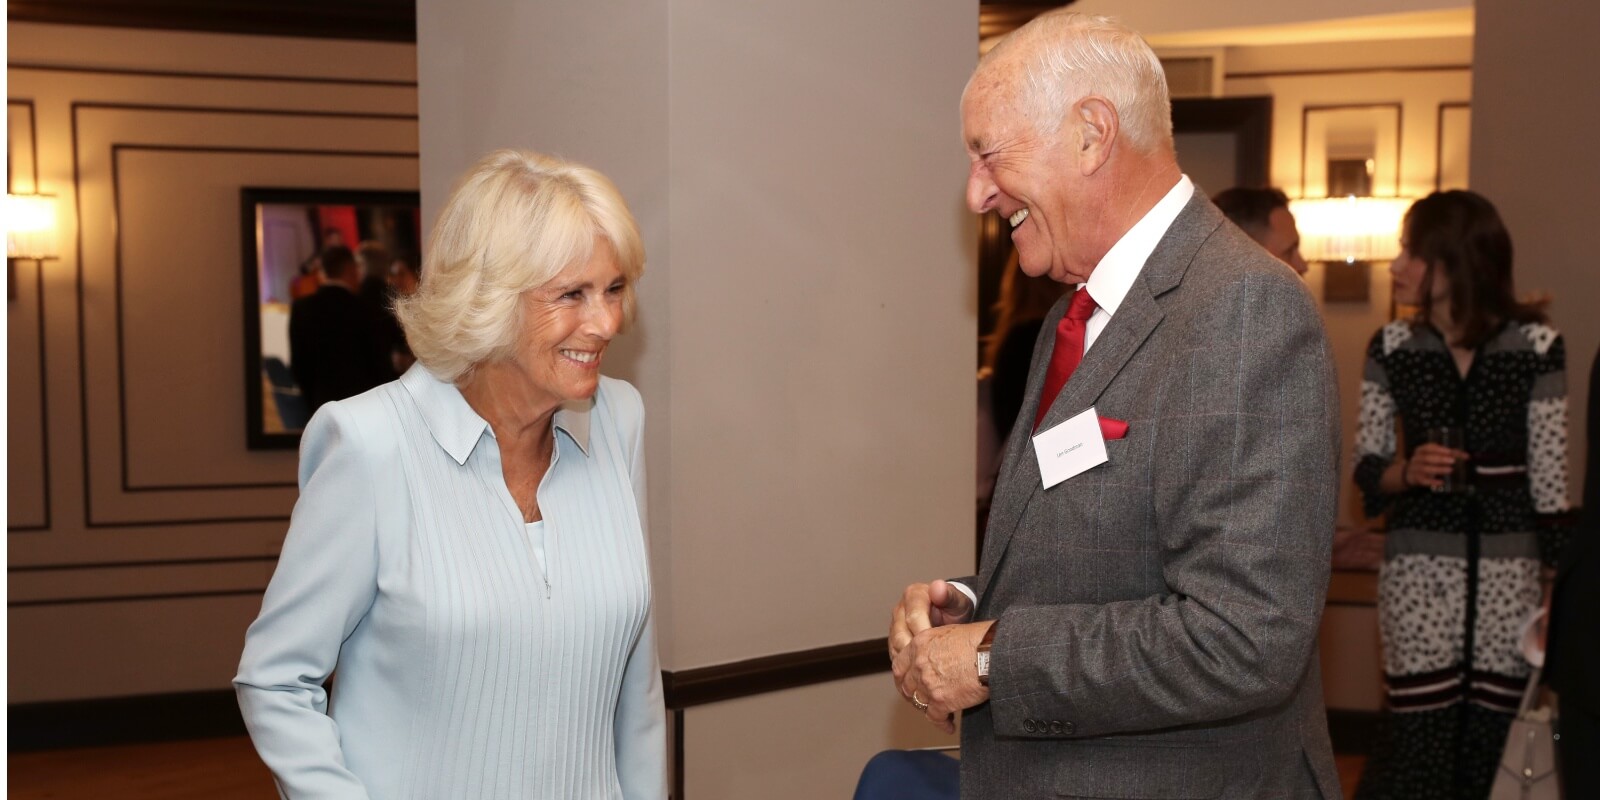 Camilla Parker Bowles and Len Goodman at a charity event in 2019.